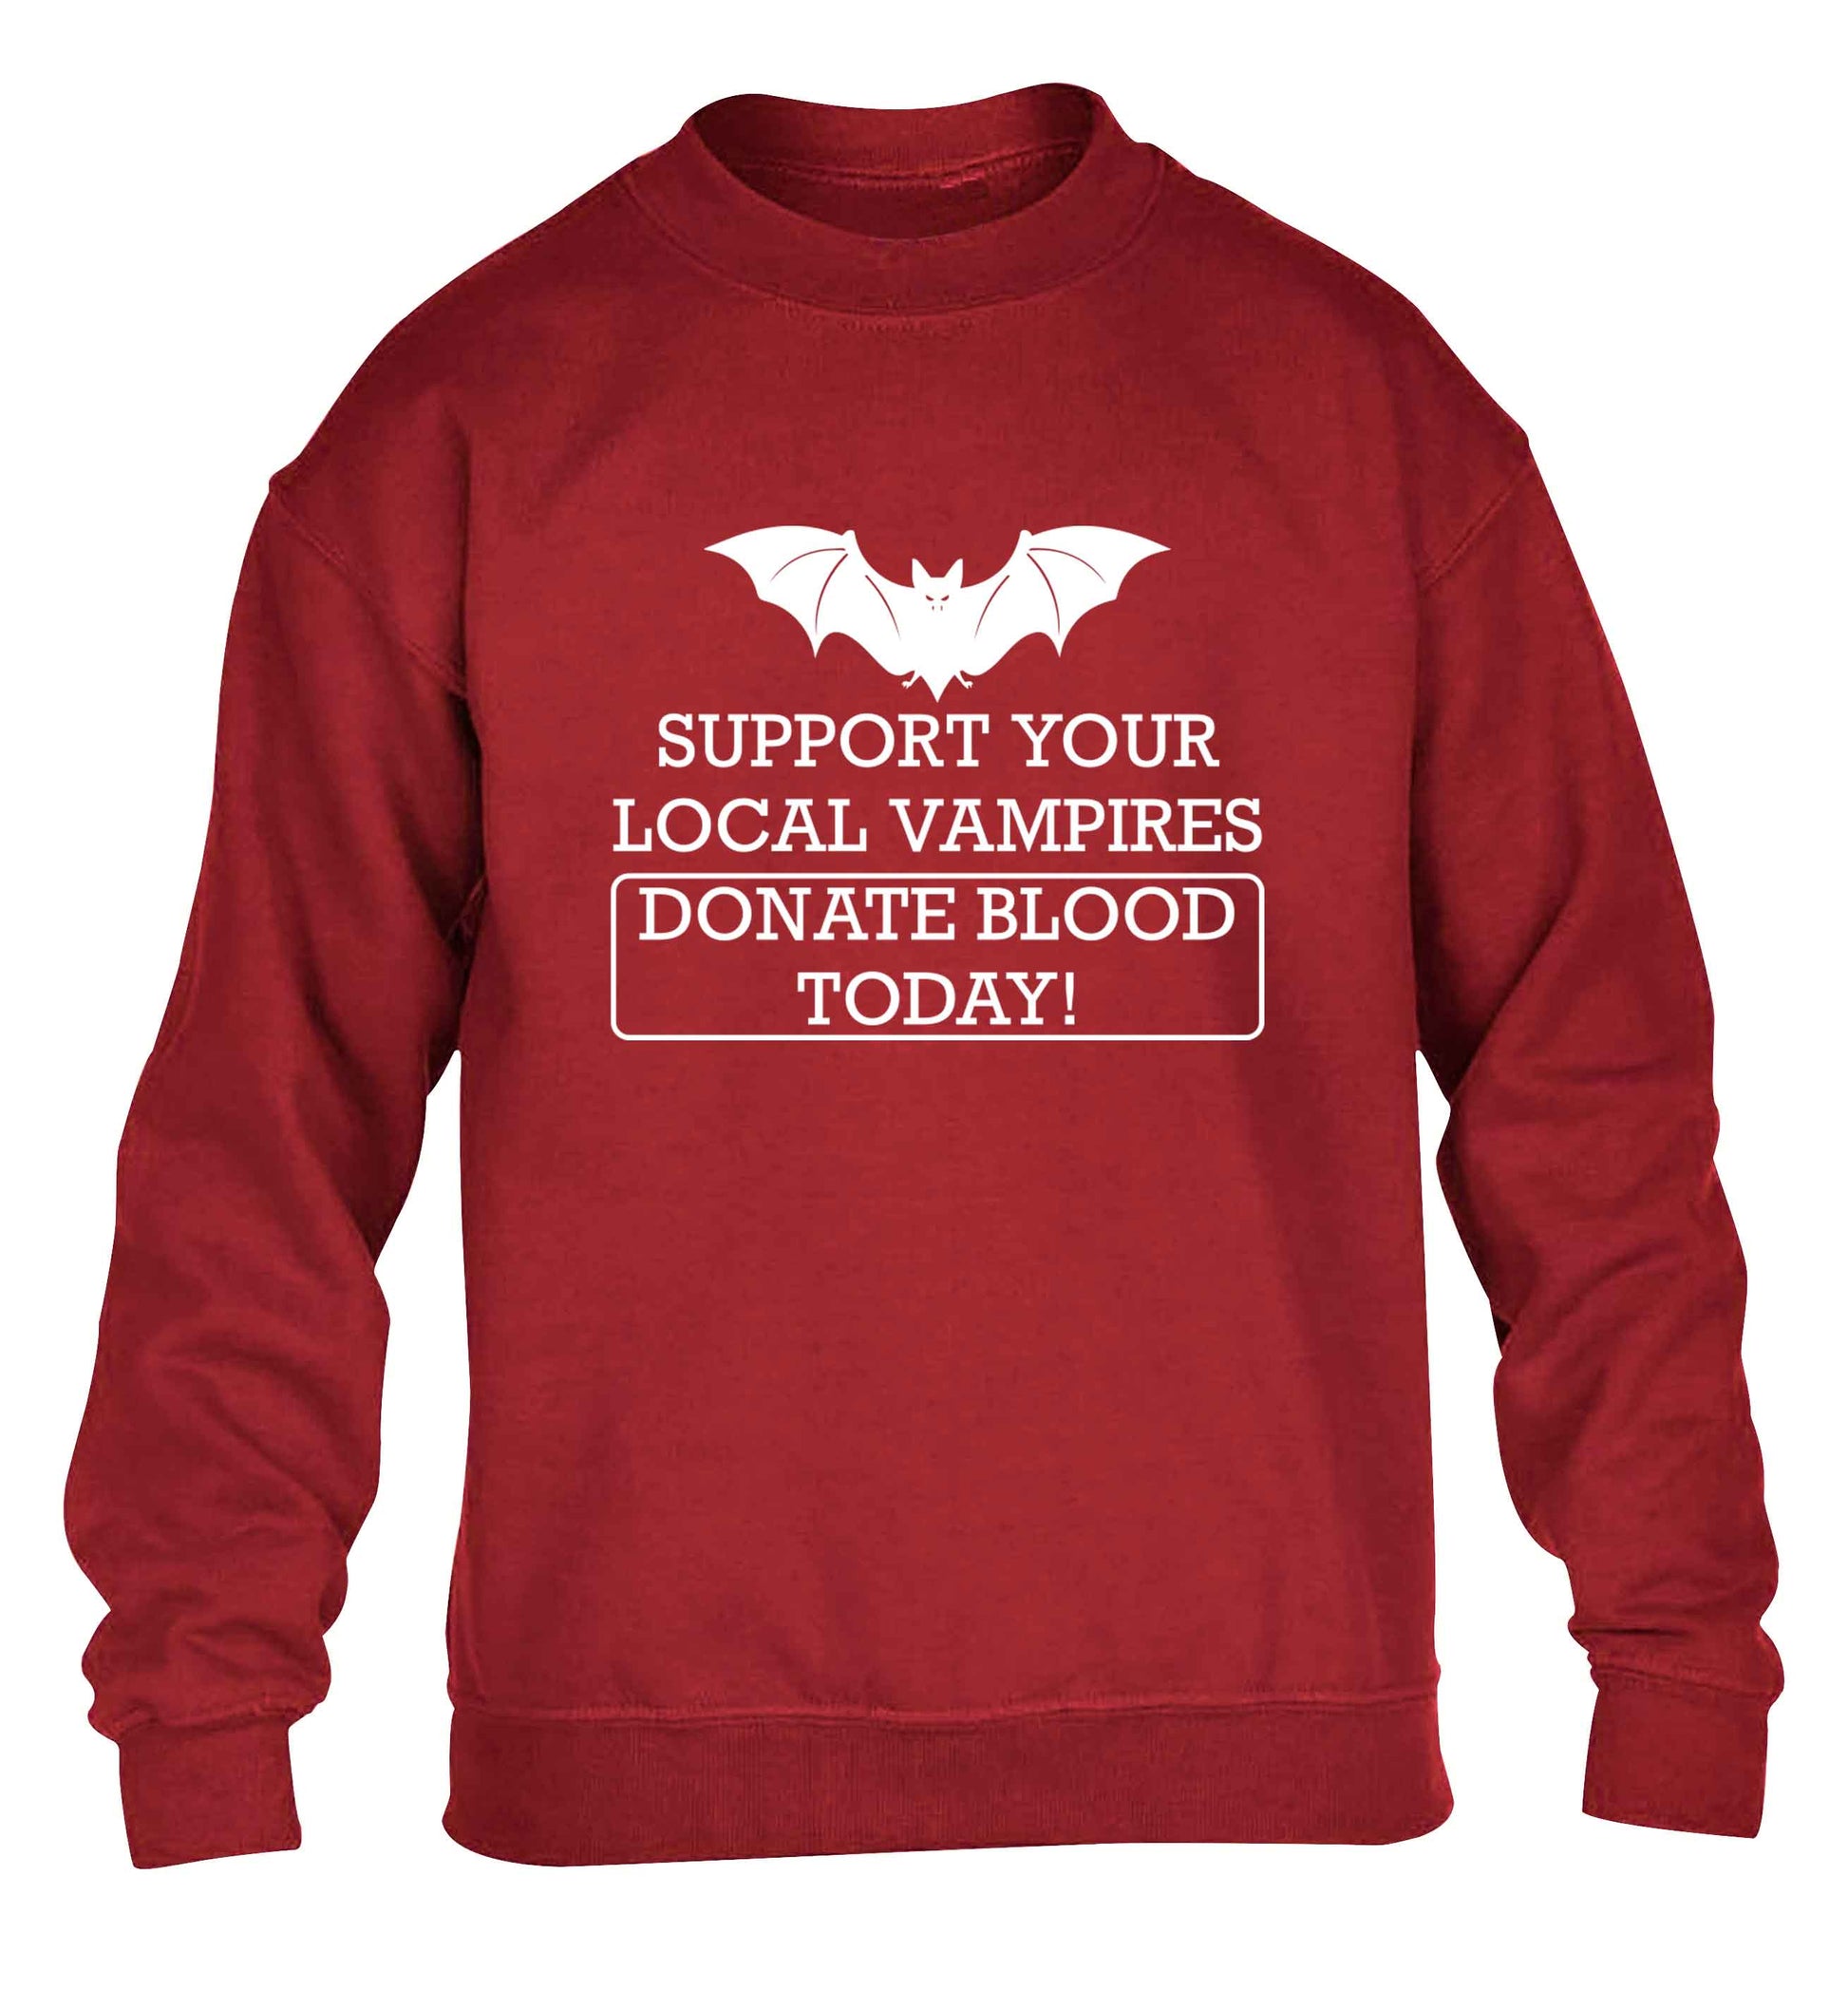 Support your local vampires donate blood today! children's grey sweater 12-13 Years